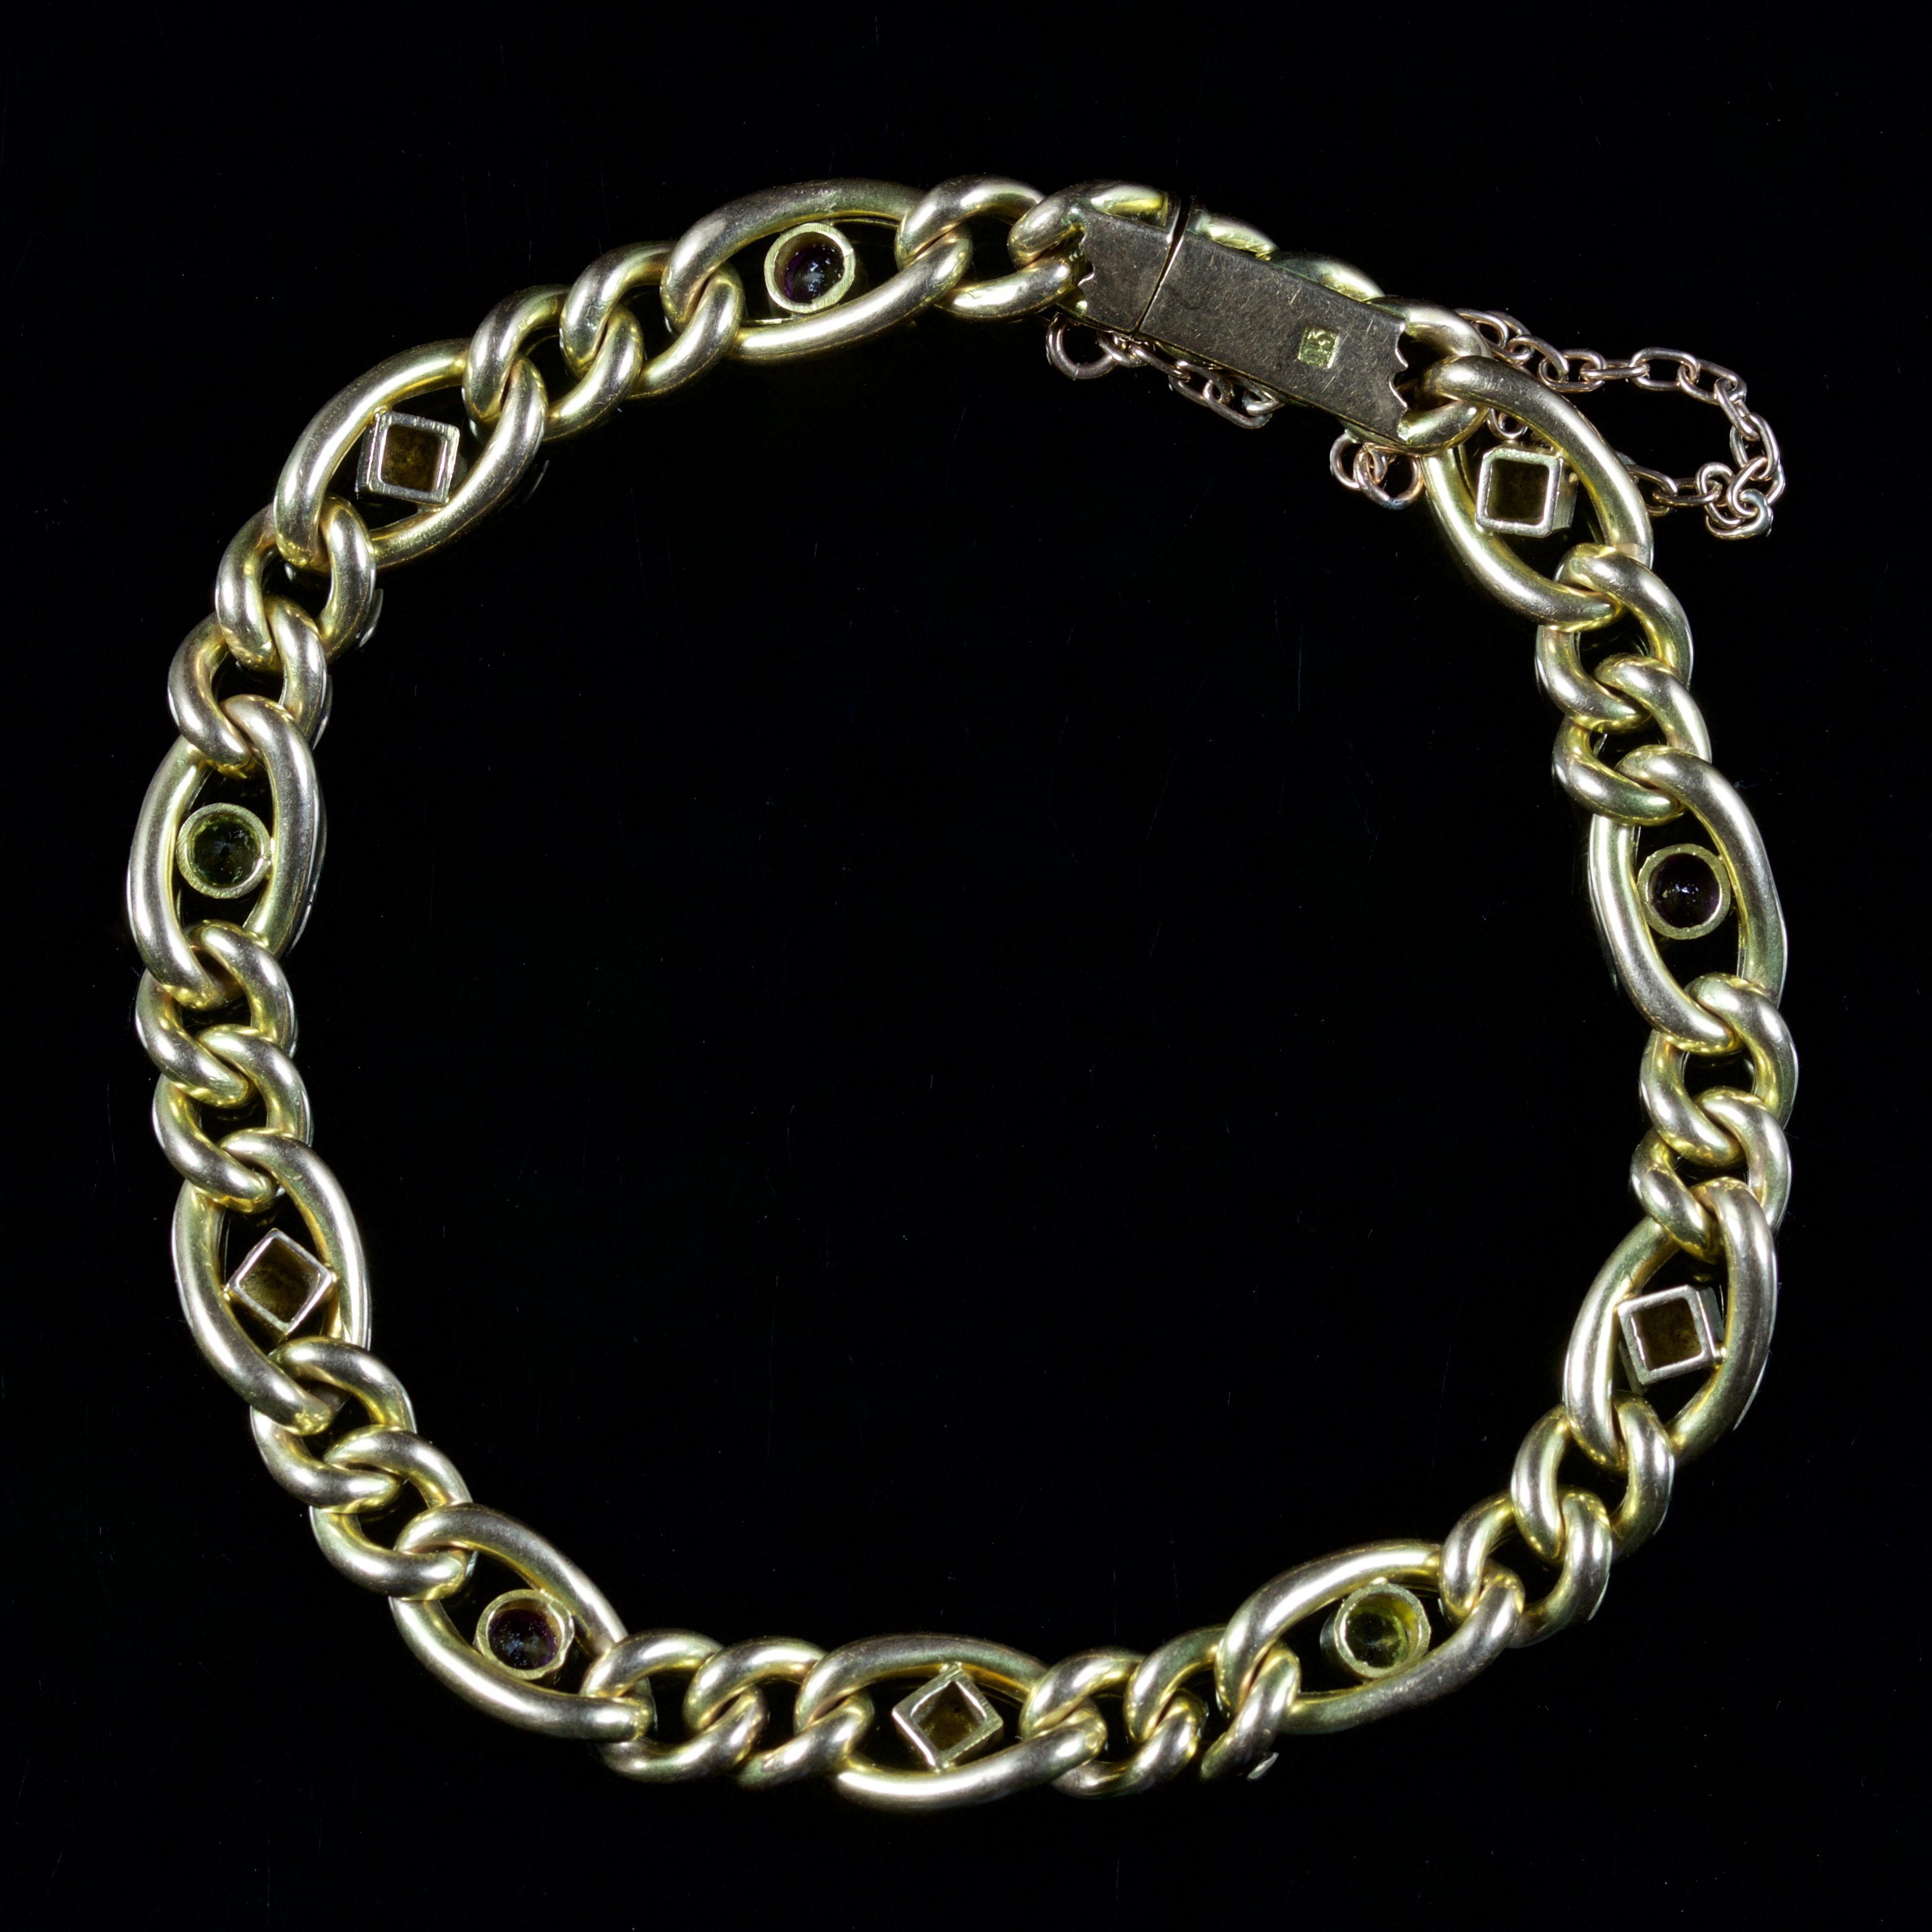 This spectacular Victorian Suffragette bracelet is 15ct Gold, Circa 1900.

The bracelet is decorated with a combination of rich green Peridot’s, violet Amethyst’s and creamy Pearls.

Suffragettes liked to be depicted as feminine, their jewellery